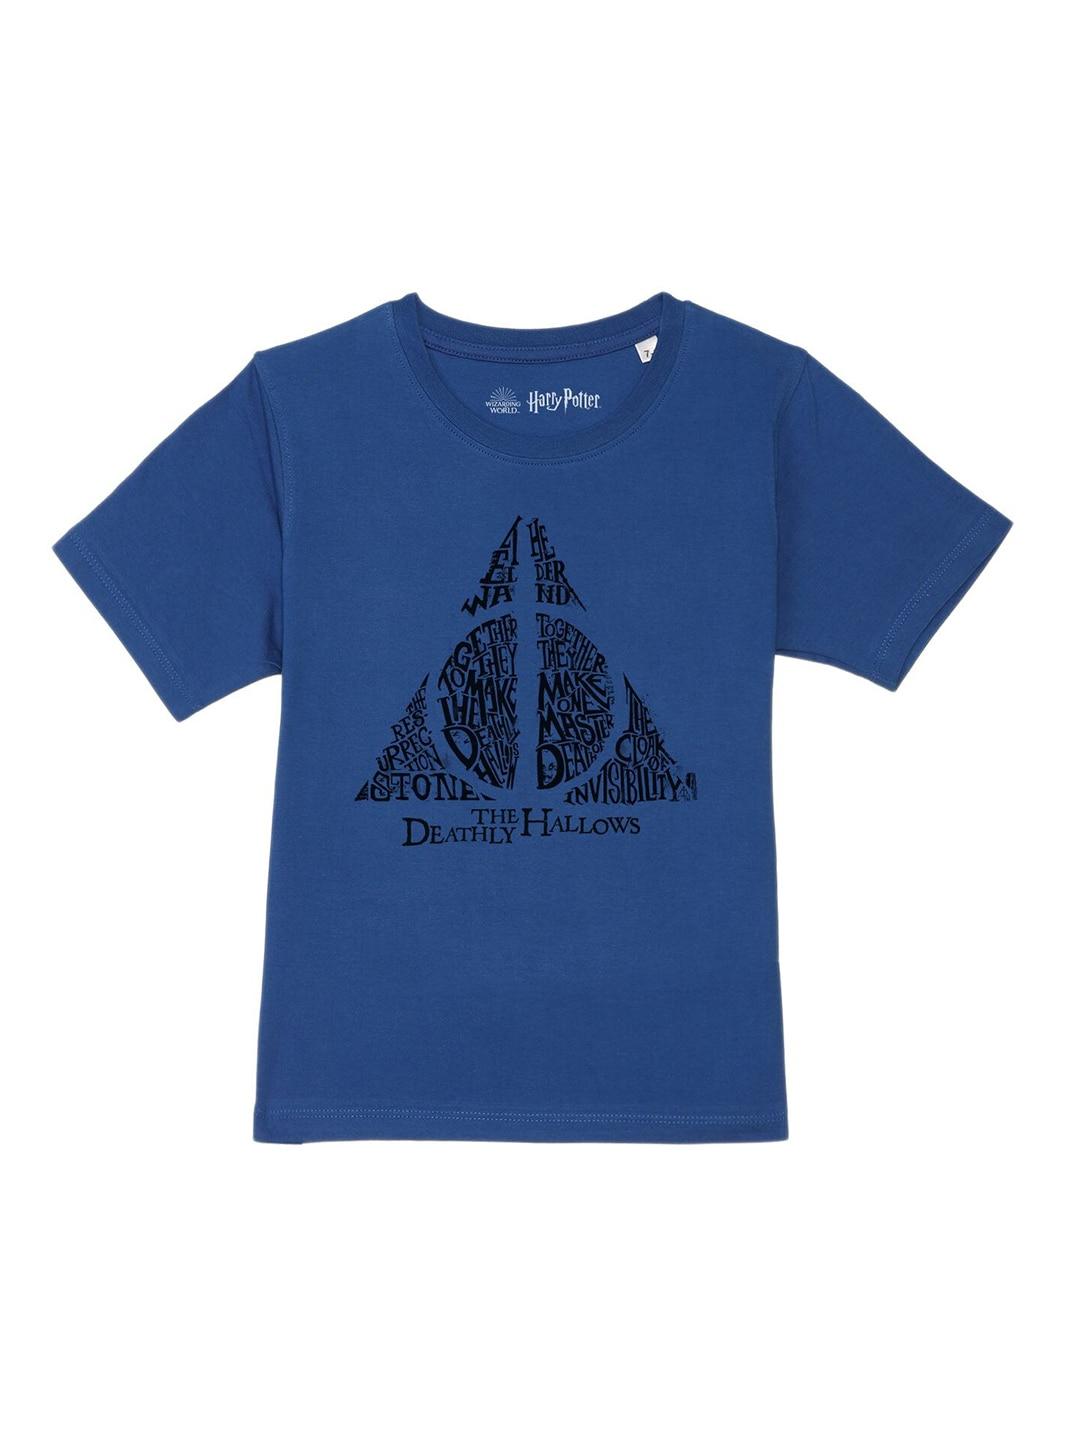 Harry Potter by Wear Your Mind Boys Blue Printed Pure Cotton T-shirt